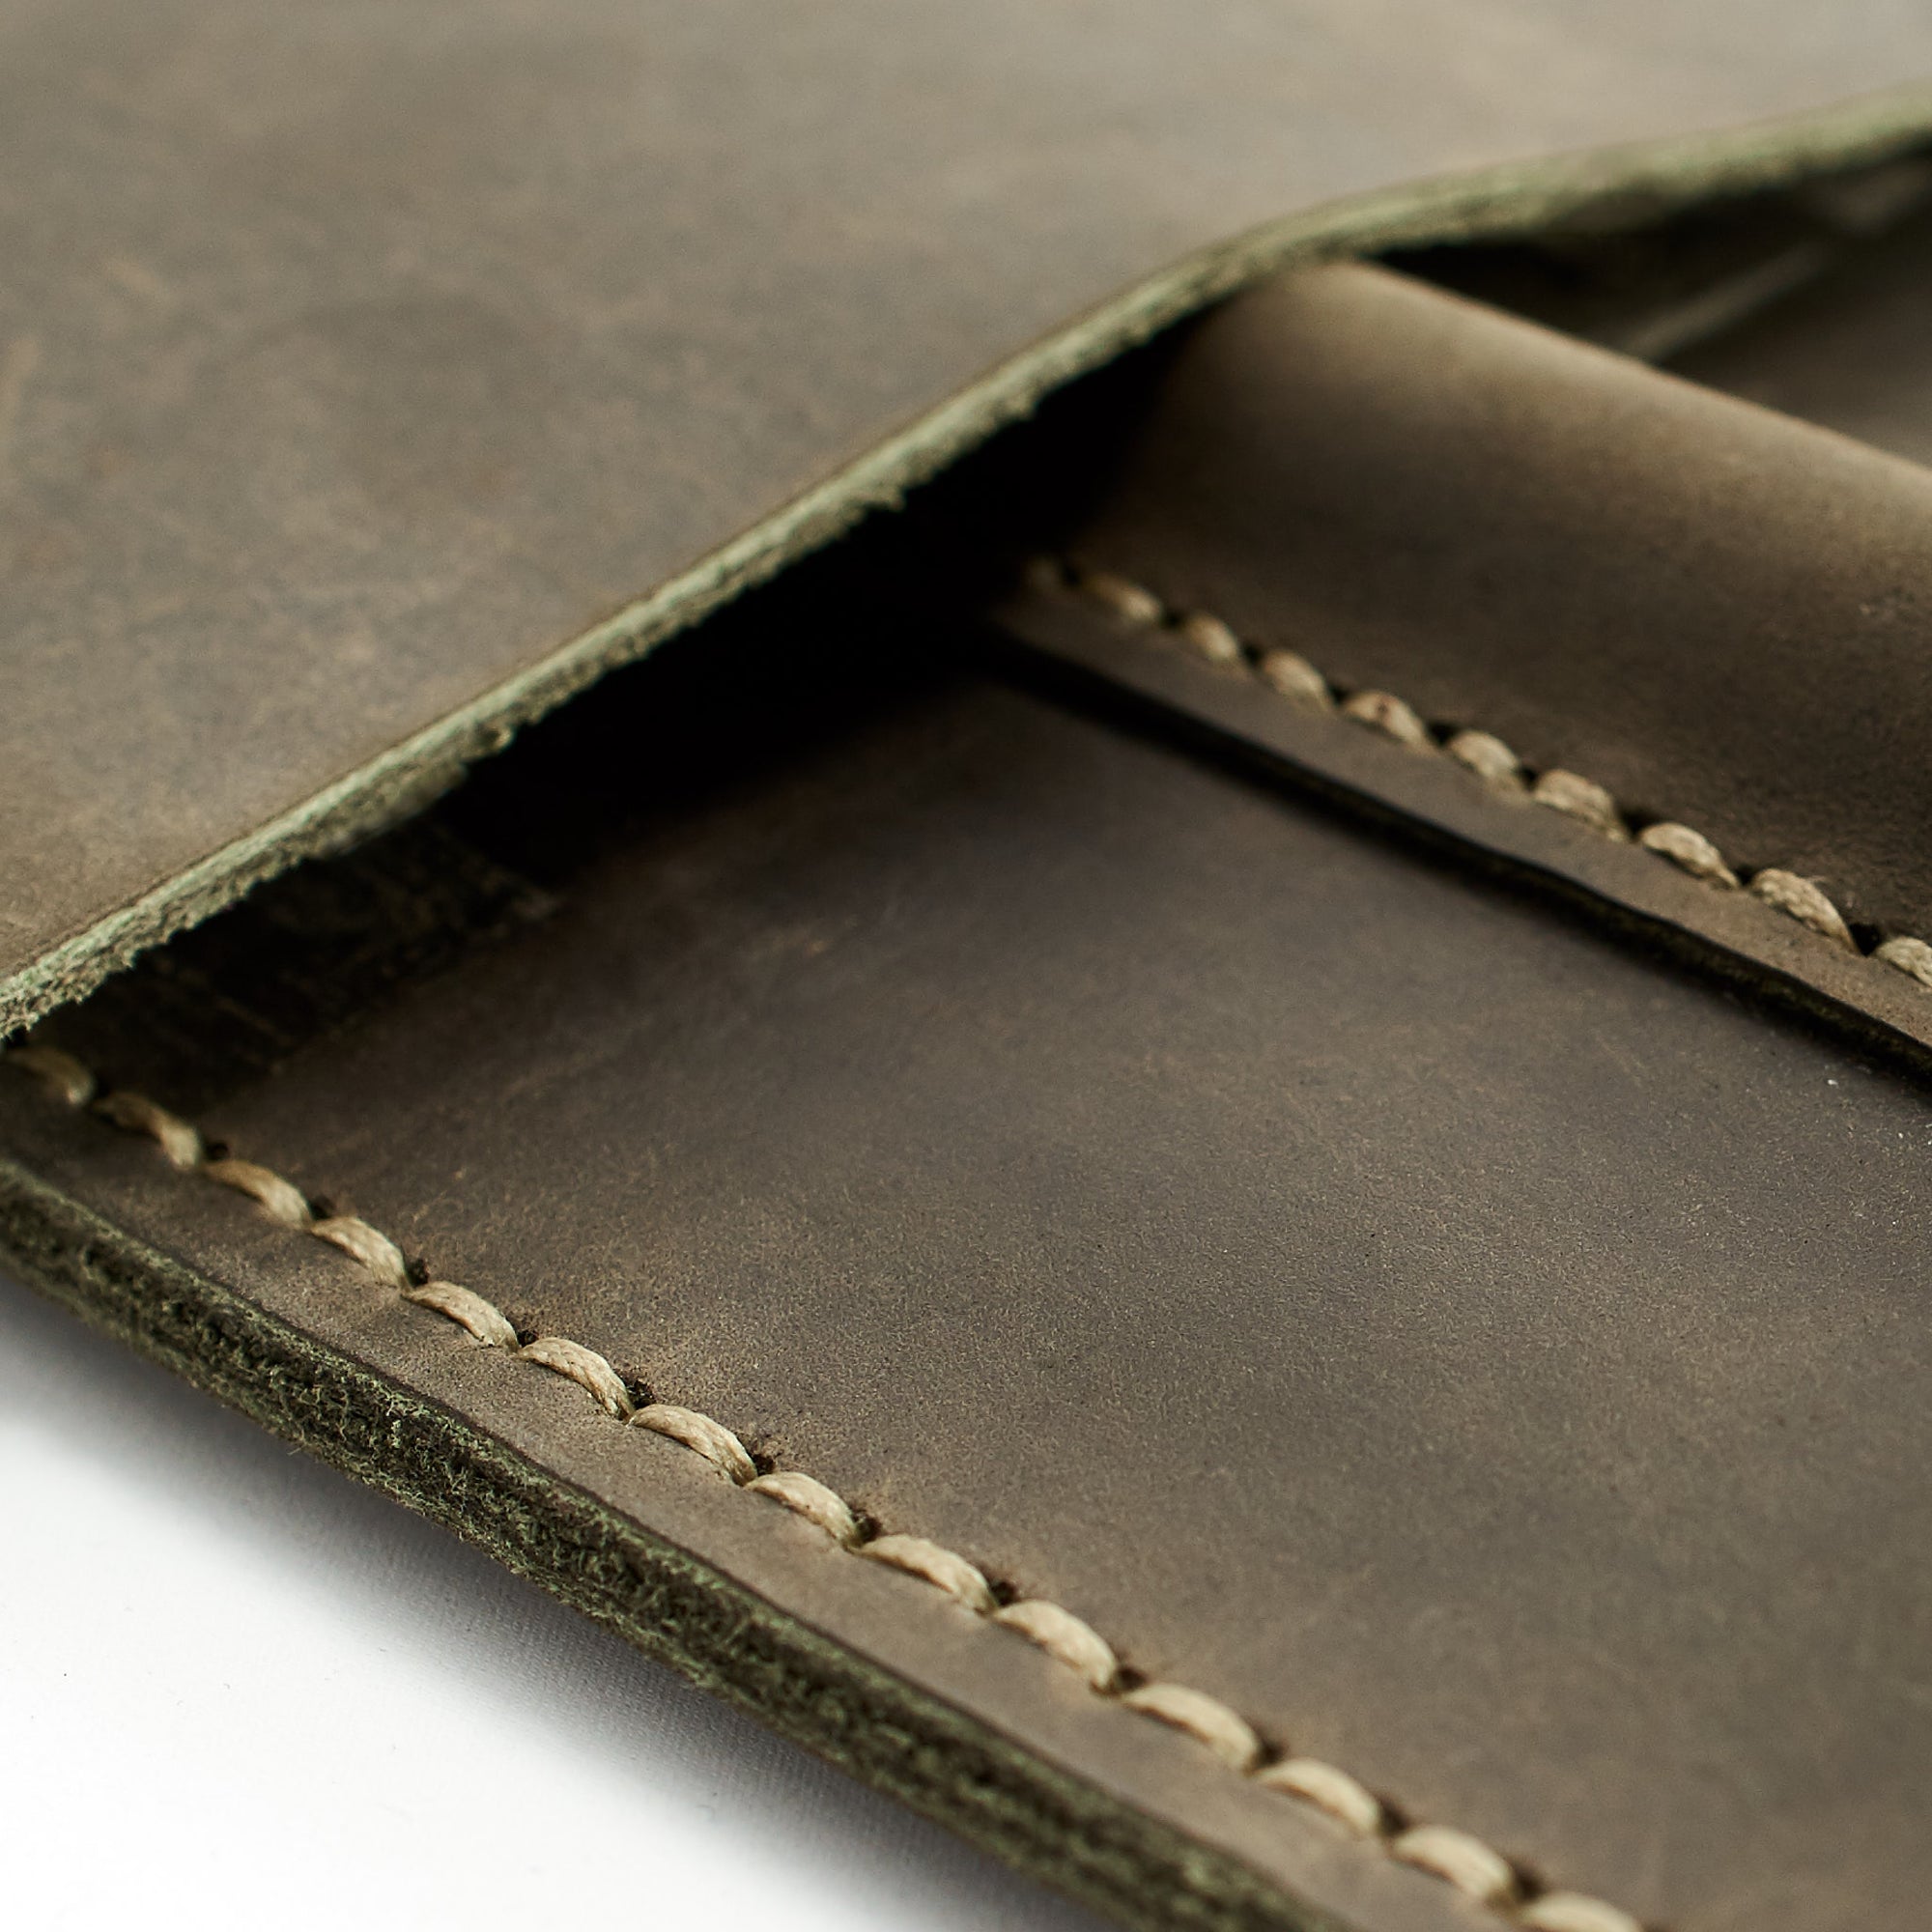 Hand Stitched. iPad Sleeve. iPad Leather Case Green With Apple Pencil Holder by Capra Leather